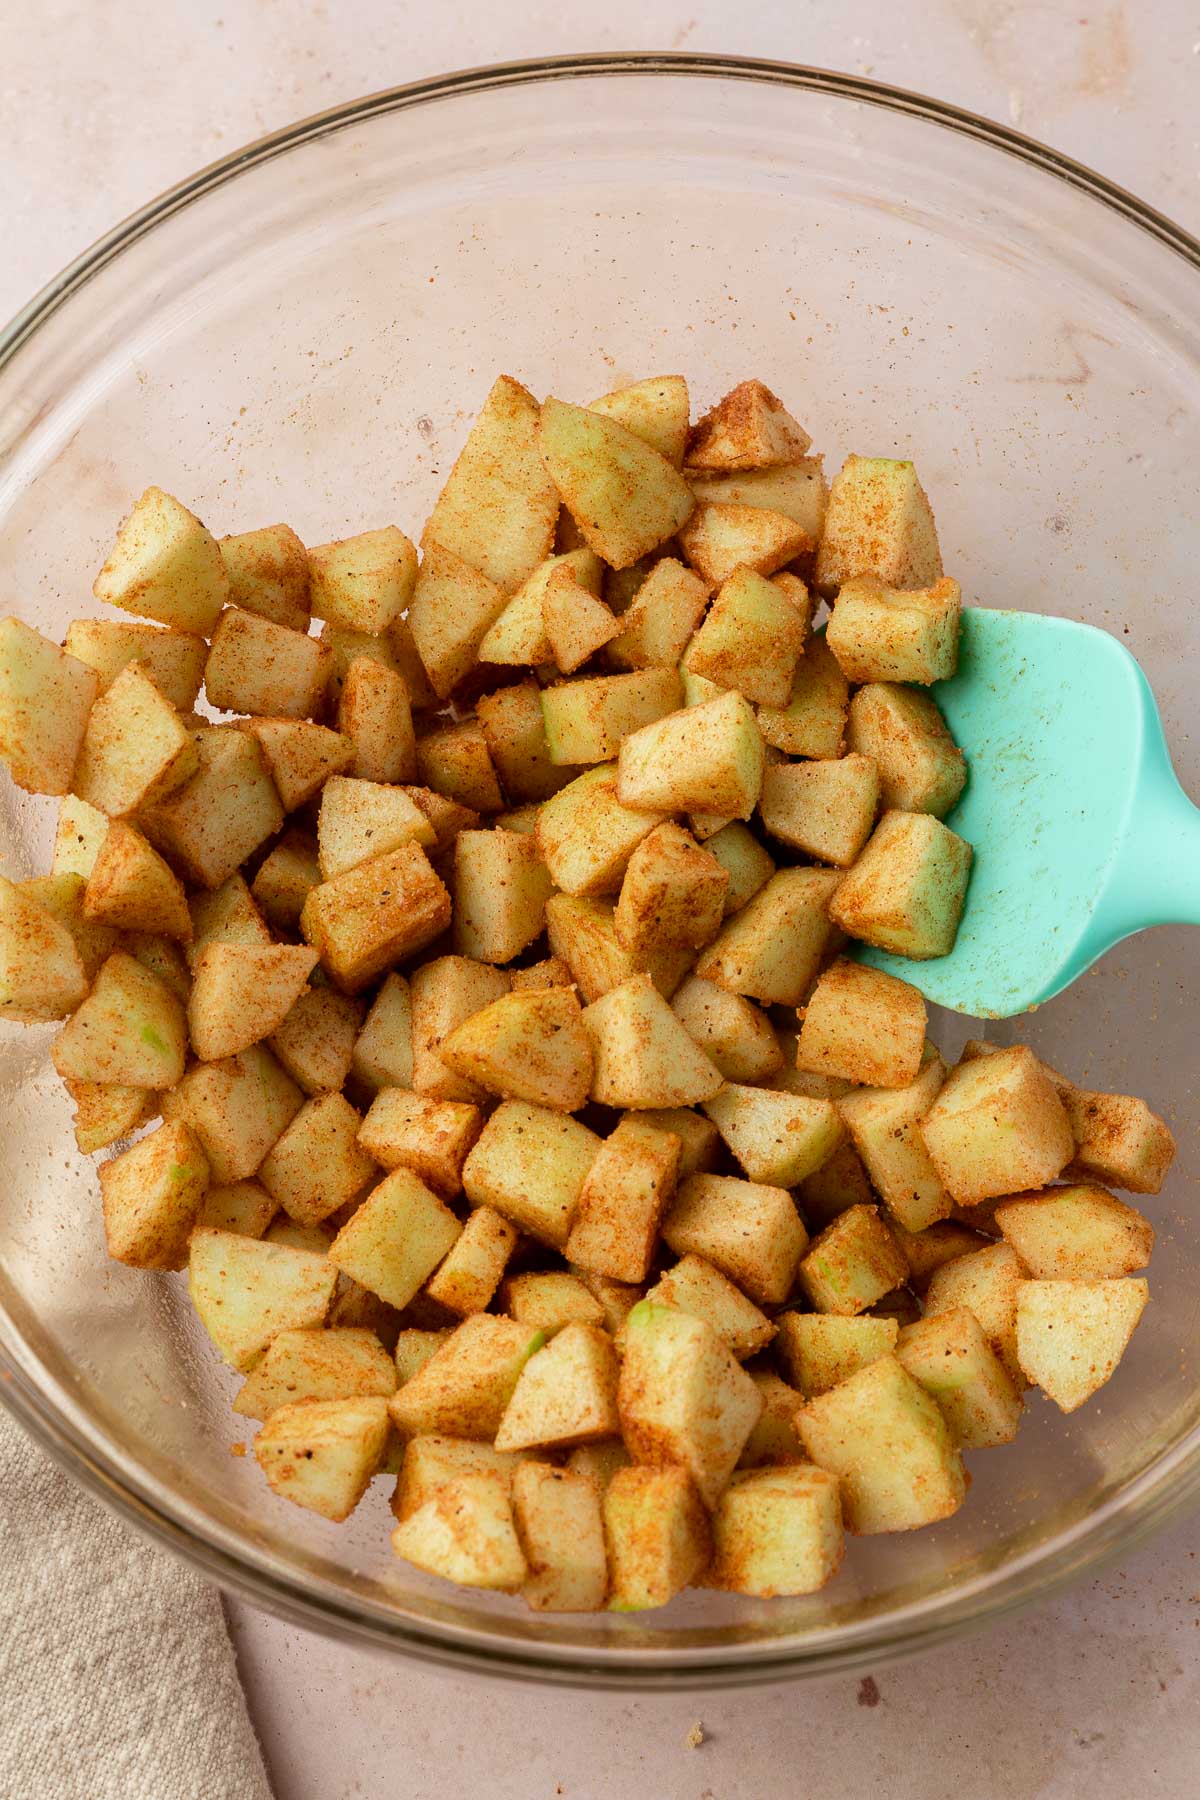 A glass mixing bowl with diced granny smith apples in it that has been mixed together with ground cinnamon and brown sugar with a blue rubber spatula.